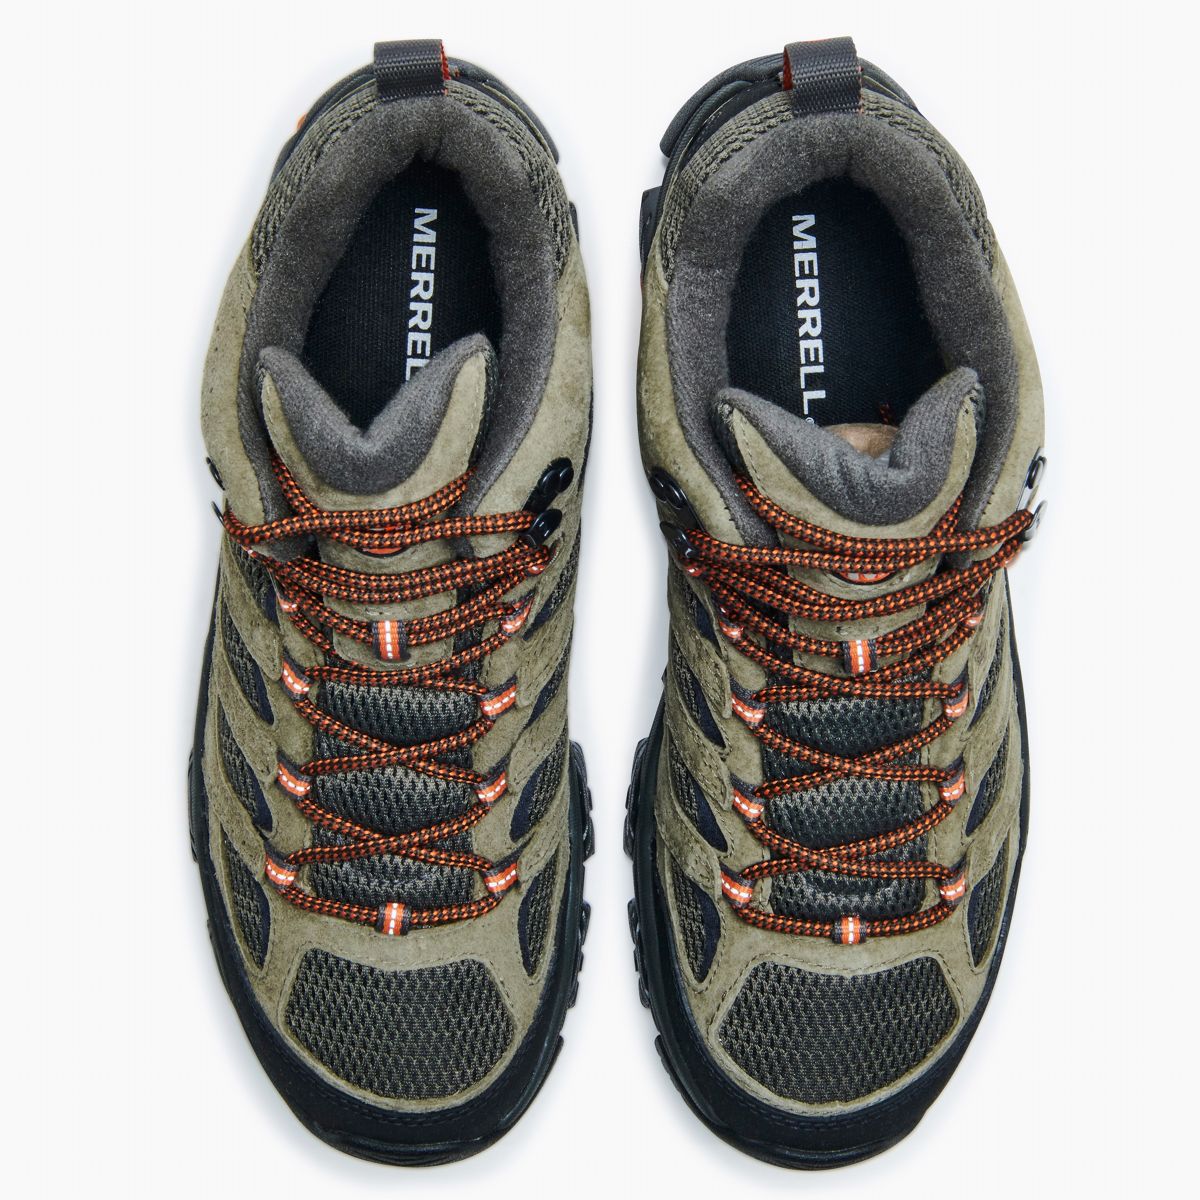 Moab 3 Mid GORE-TEX®, Olive, dynamic 3